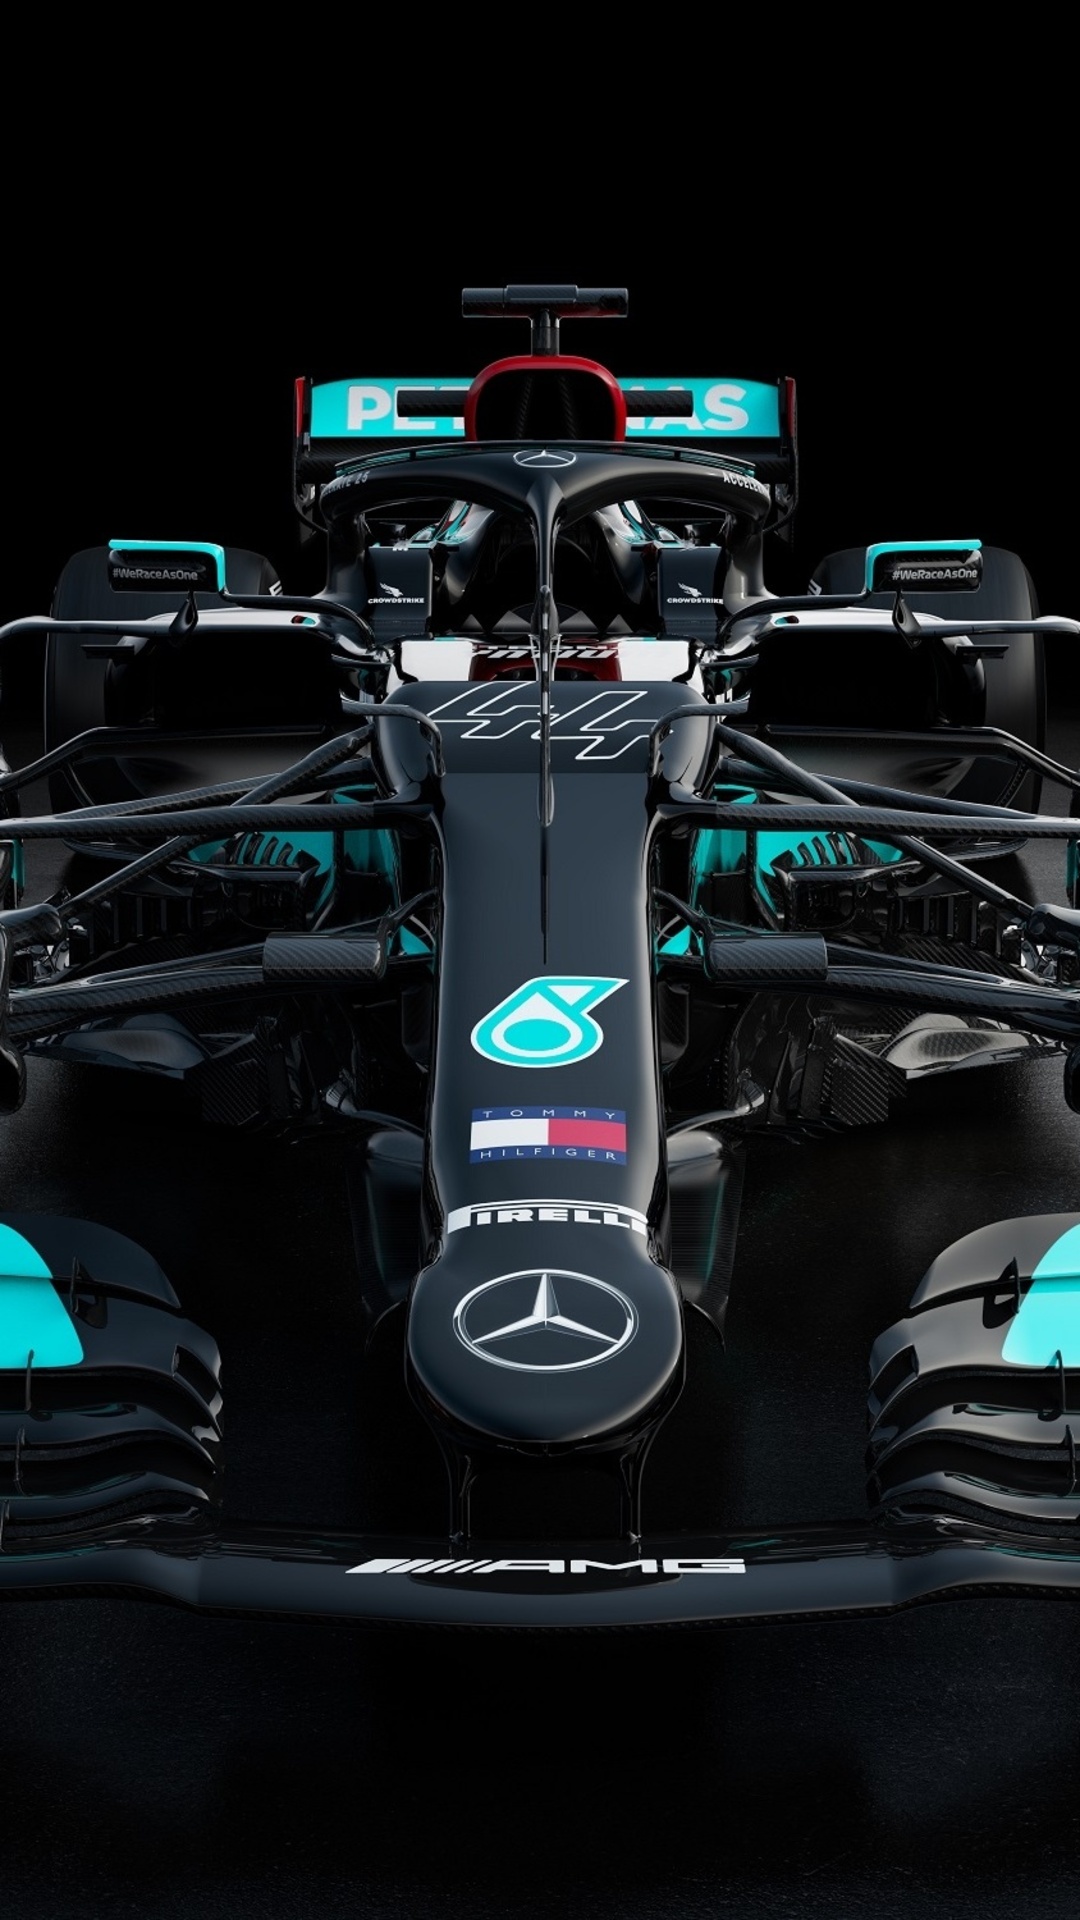 Mercedes AMG F1 W12 E Performance 2021 iPhone 6s, 6 Plus, Pixel xl , One Plus 3t, 5 HD 4k Wallpaper, Image, Background, Photo and Picture